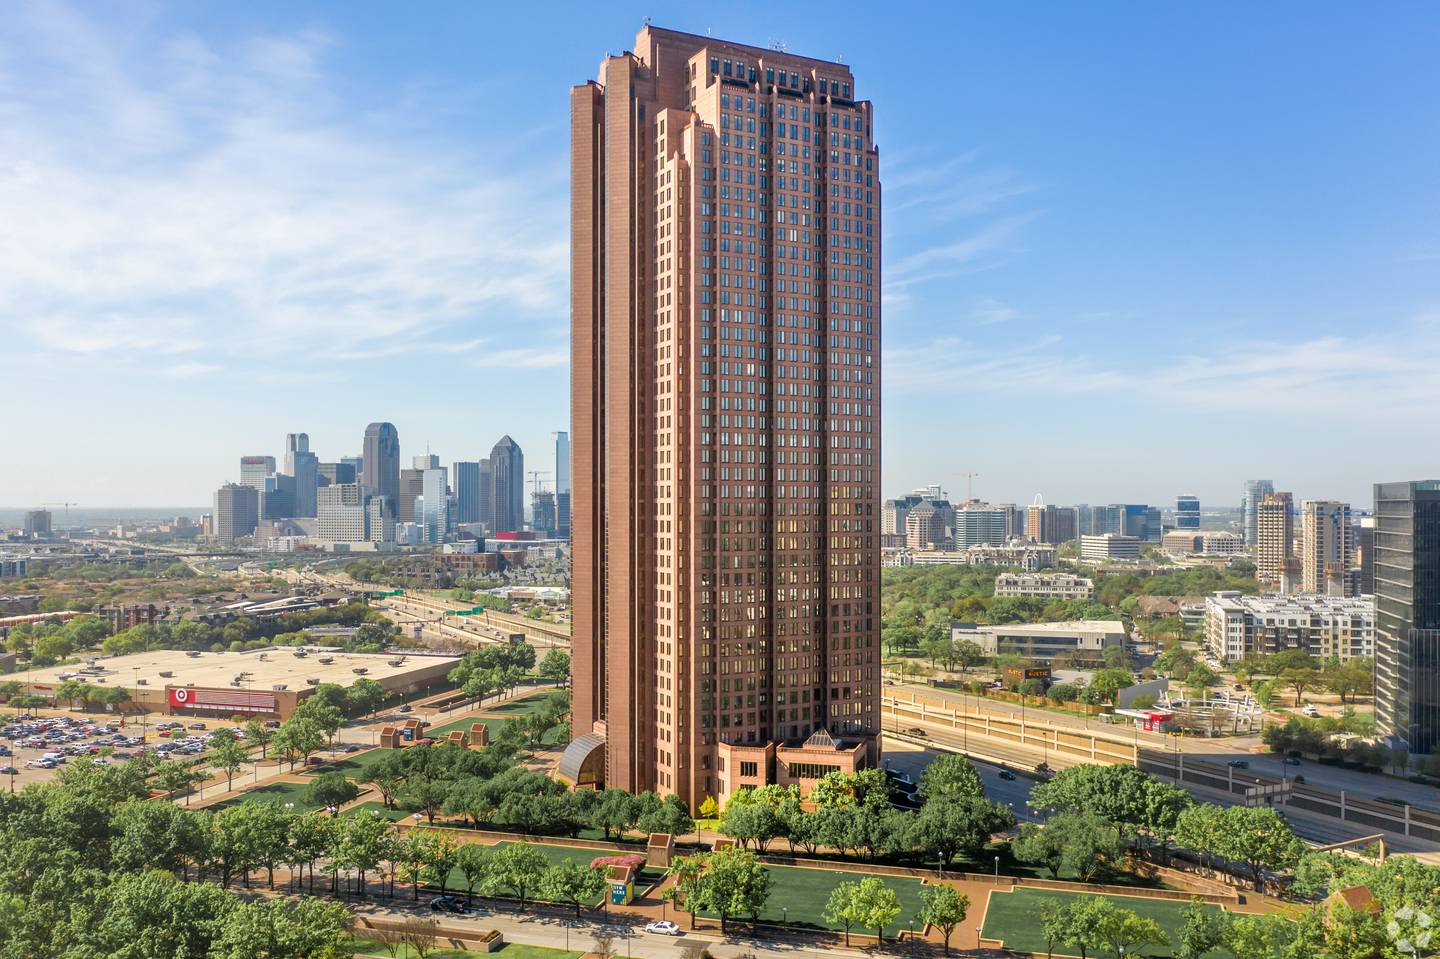 New Neiman Marcus "corporate hub" Located in the 42-story CityPlace Tower between Neiman Marcus Downtown and the North Park flagship store in Dallas, Texas.